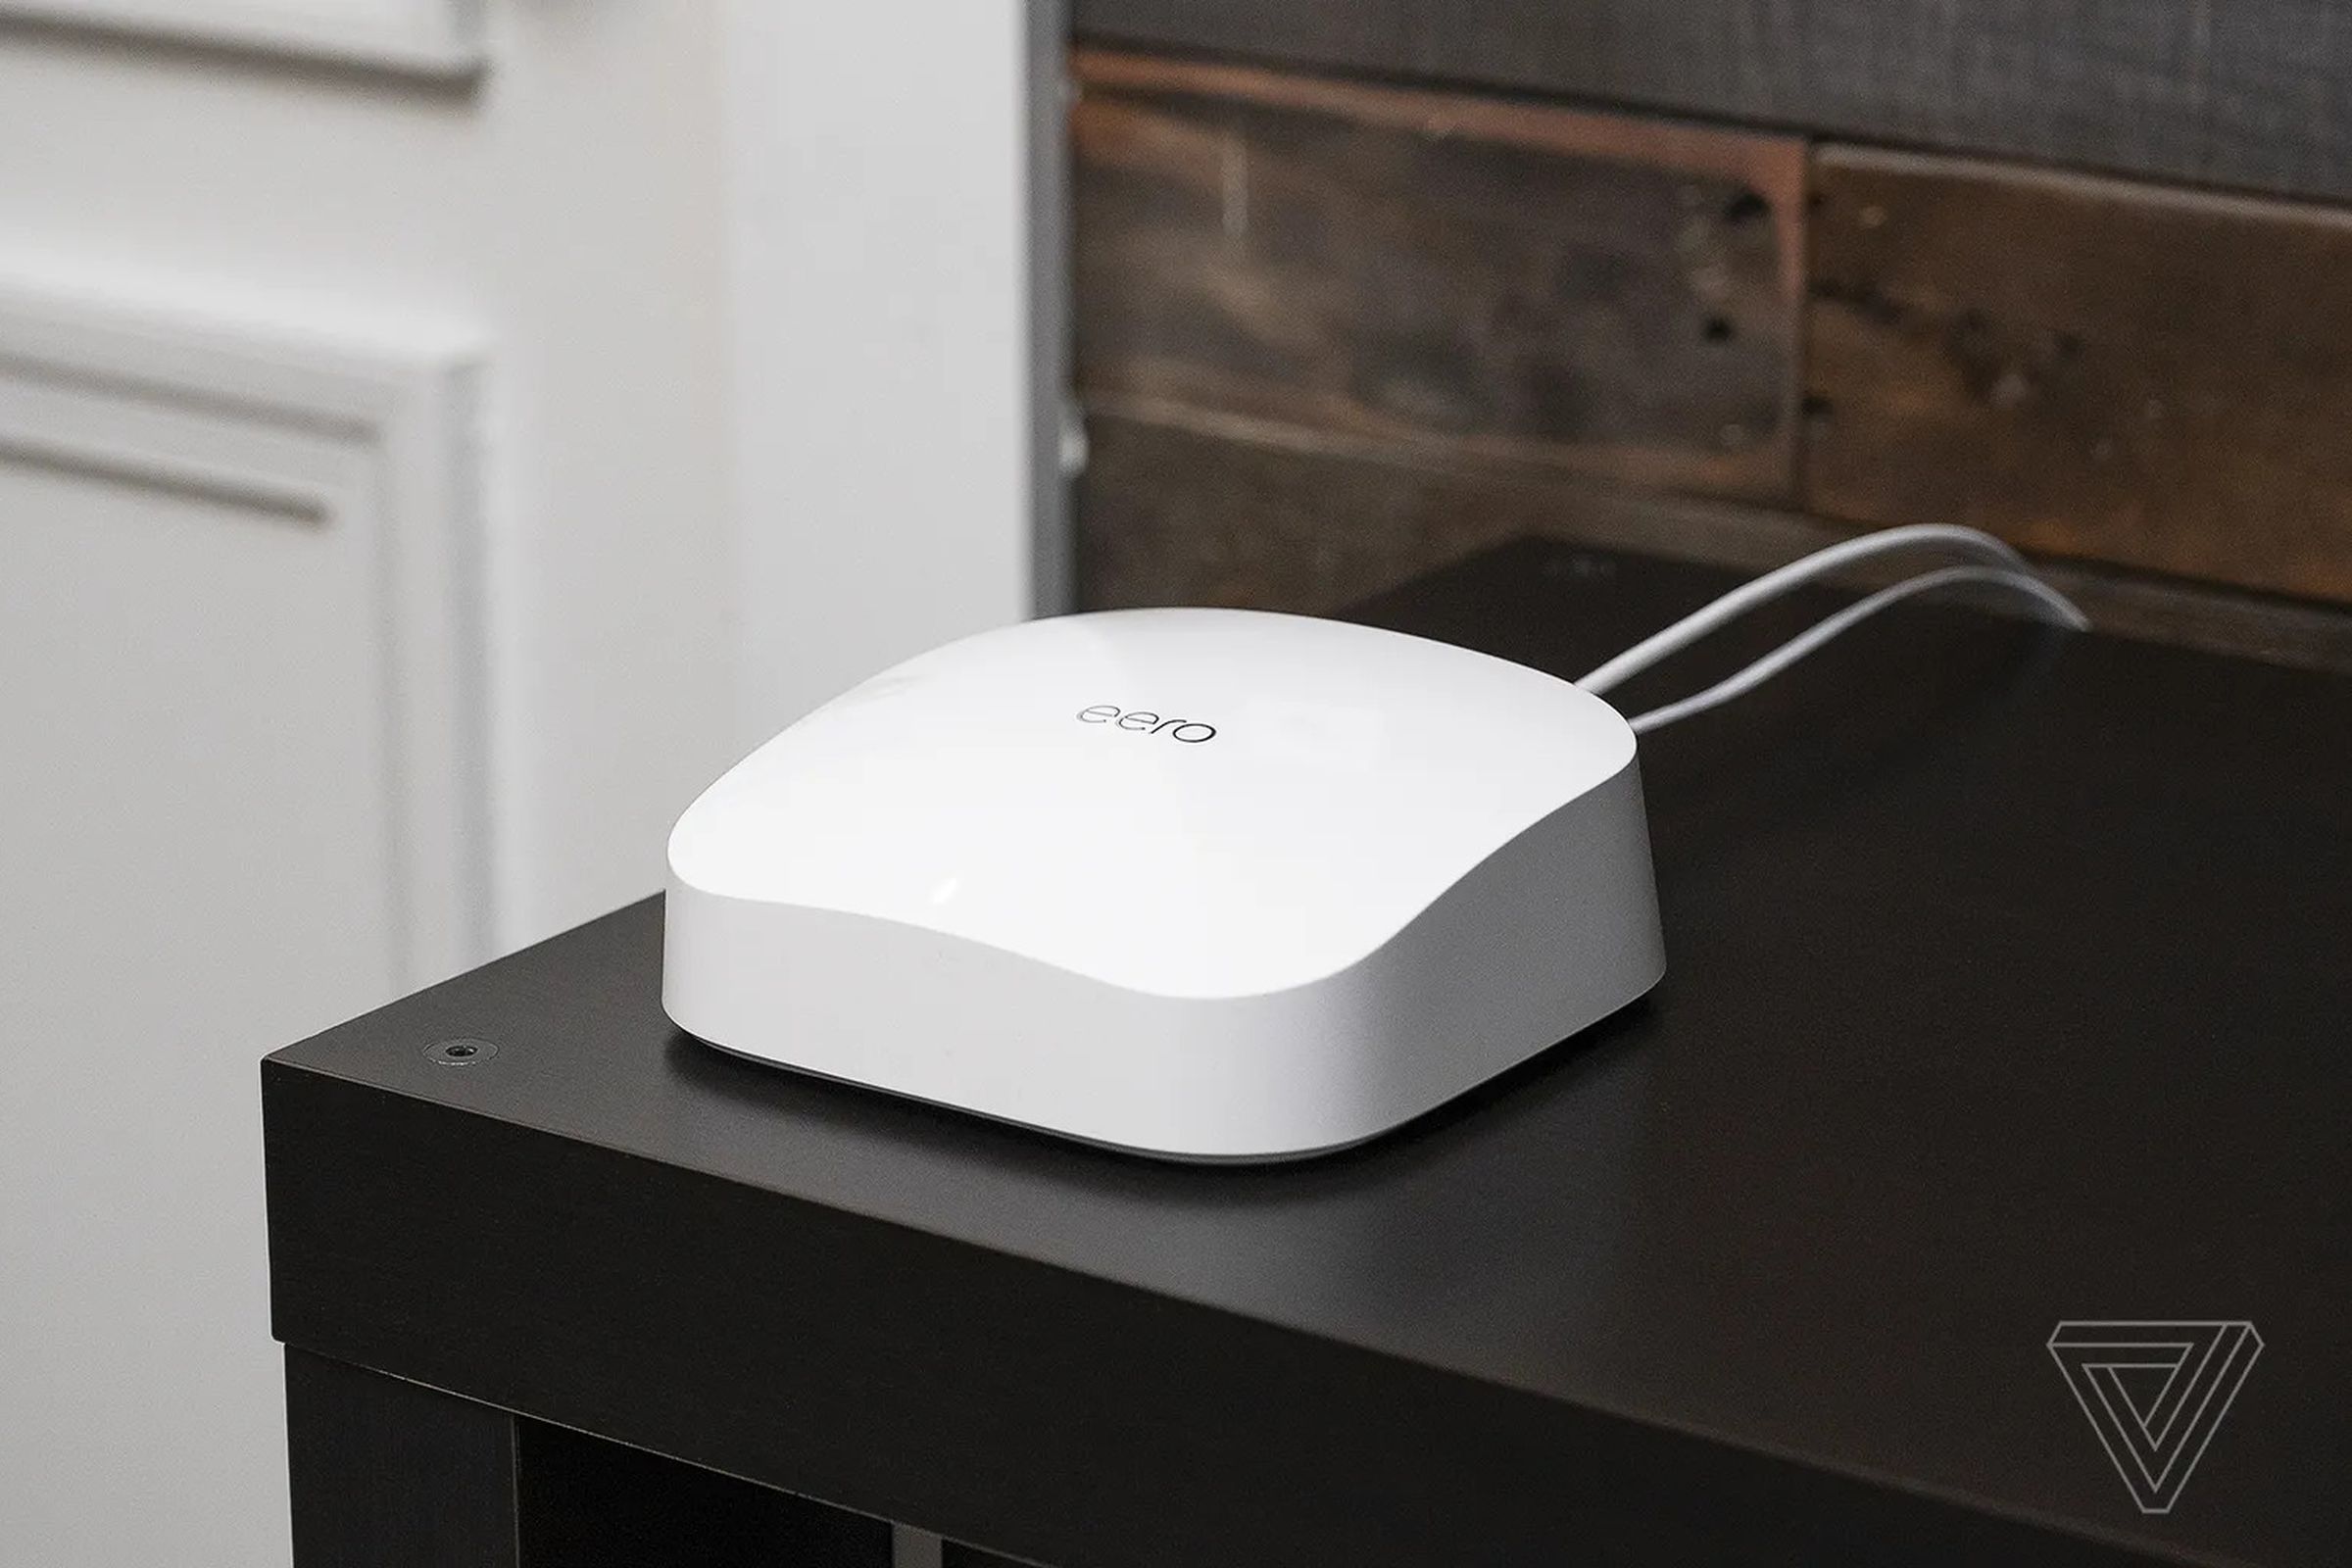 Eero’s Pro 6 offers mesh Wi-Fi options as a standalone unit or in a pack of two or three.